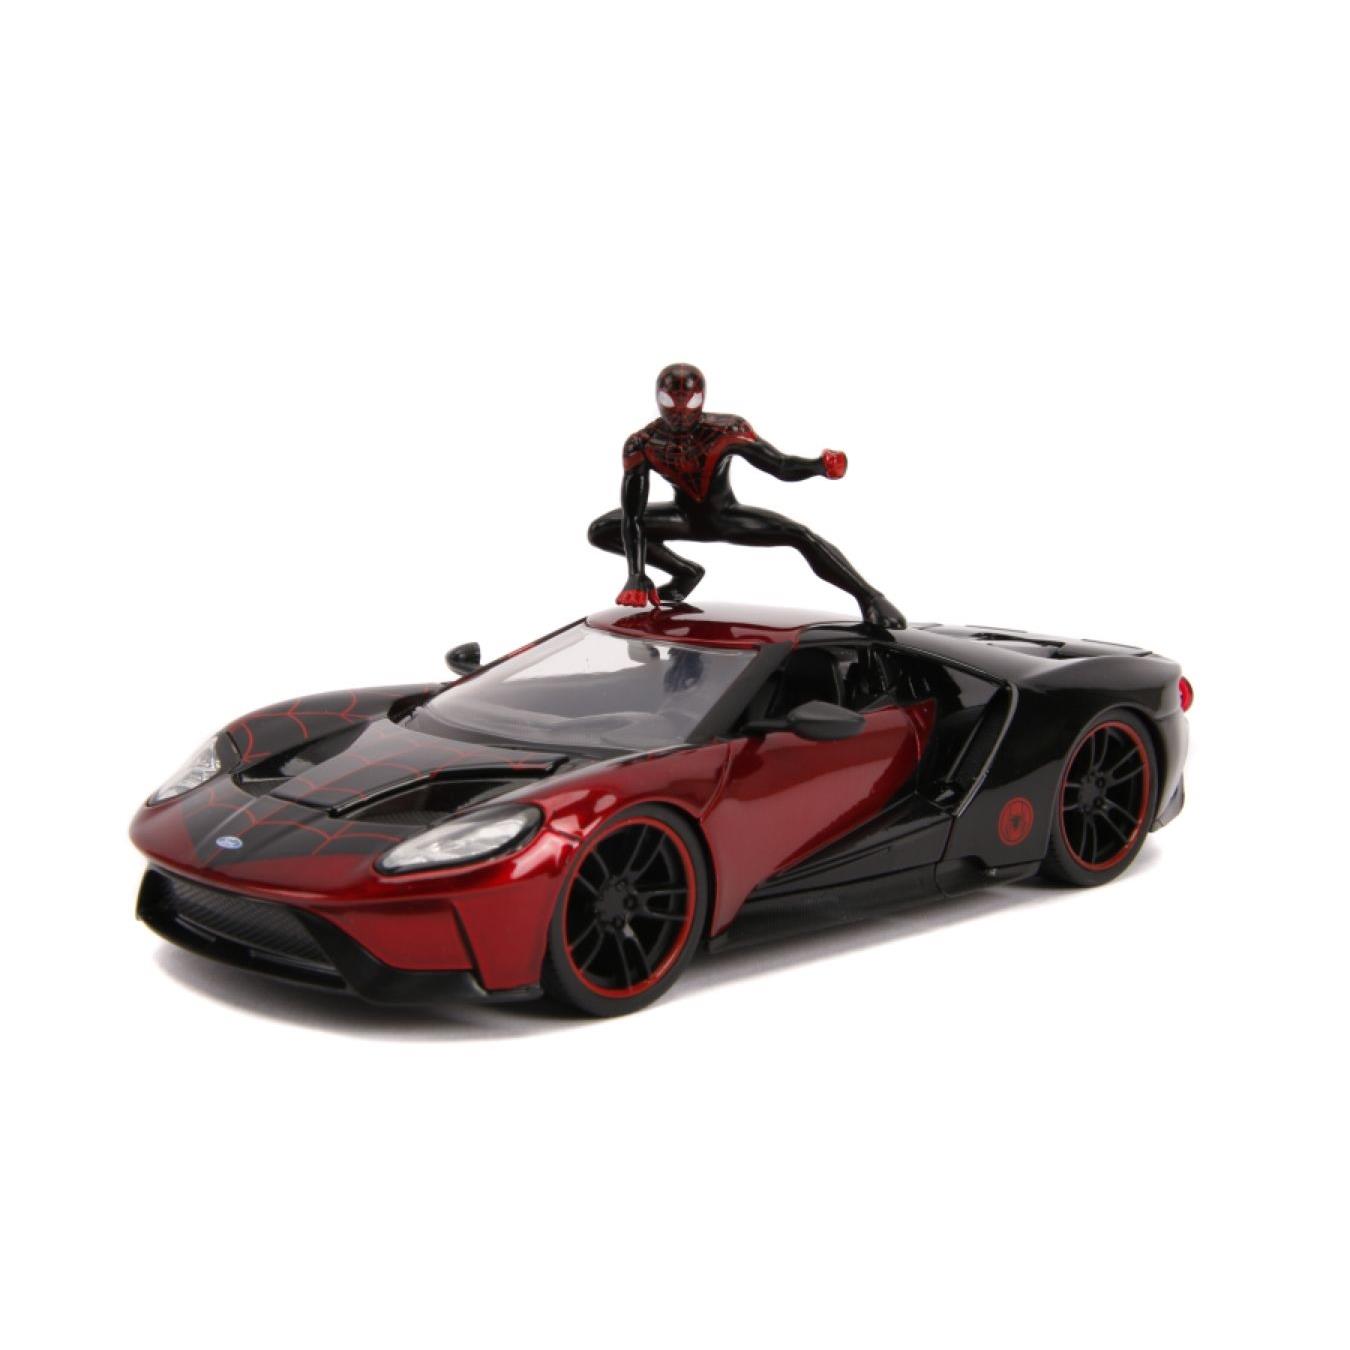 spider-man - miles morales 2017 ford gt 1:24 scale hollywood ride vehicle replica